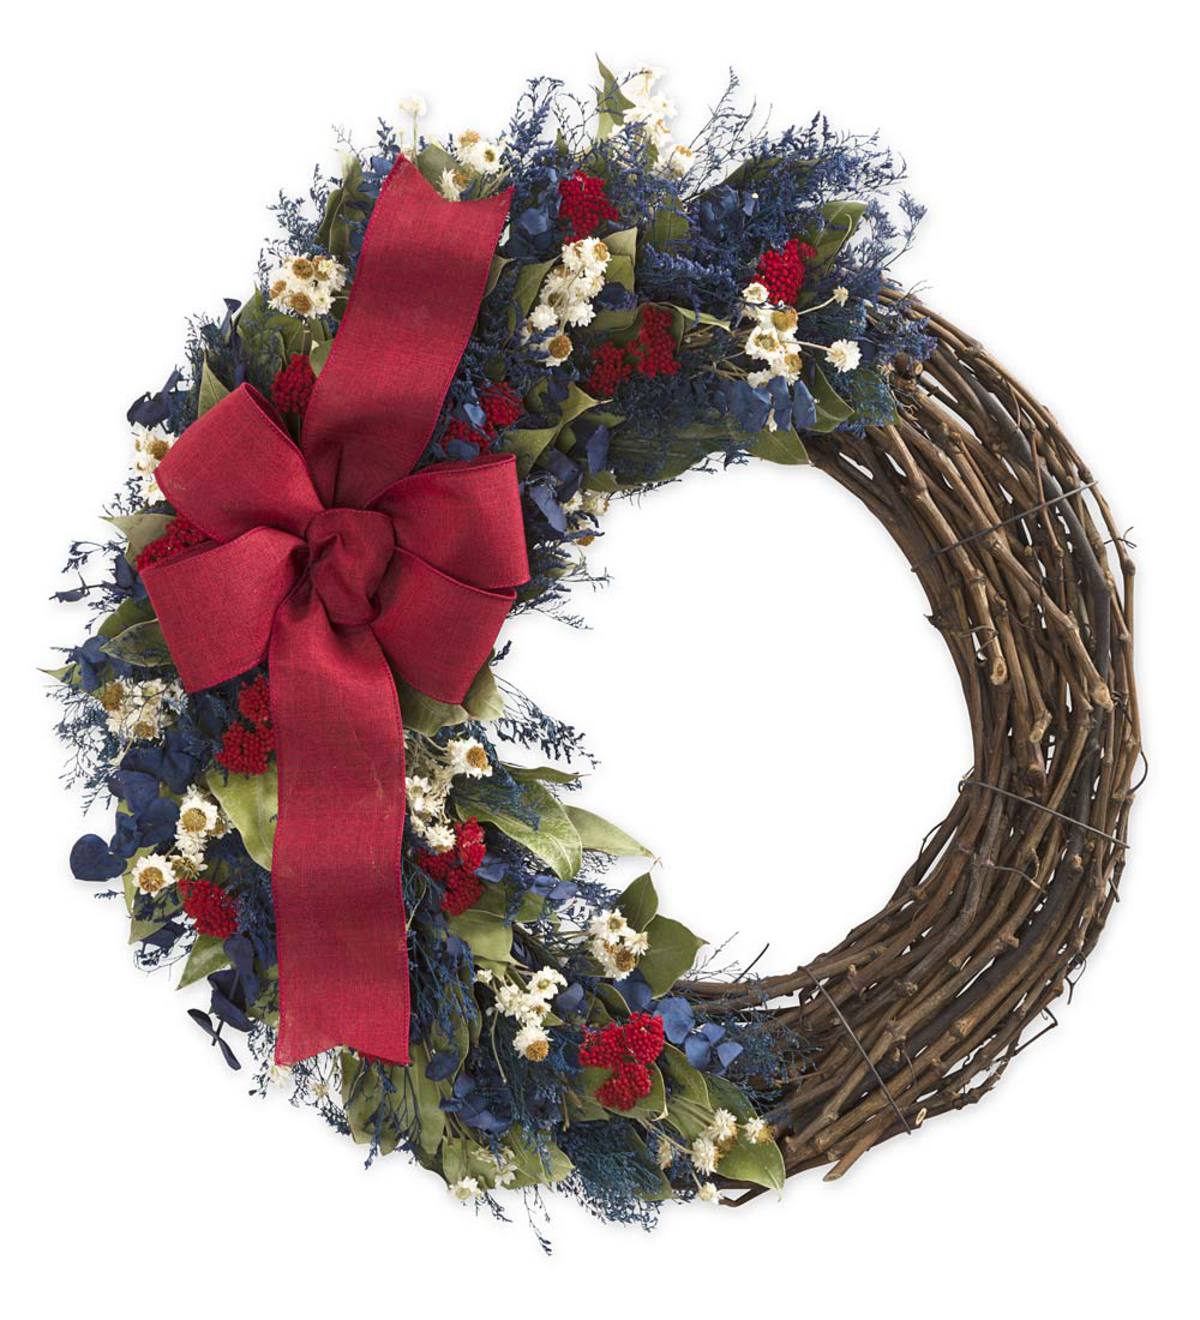 Americana Wreath with Red Ribbon, 22"dia.